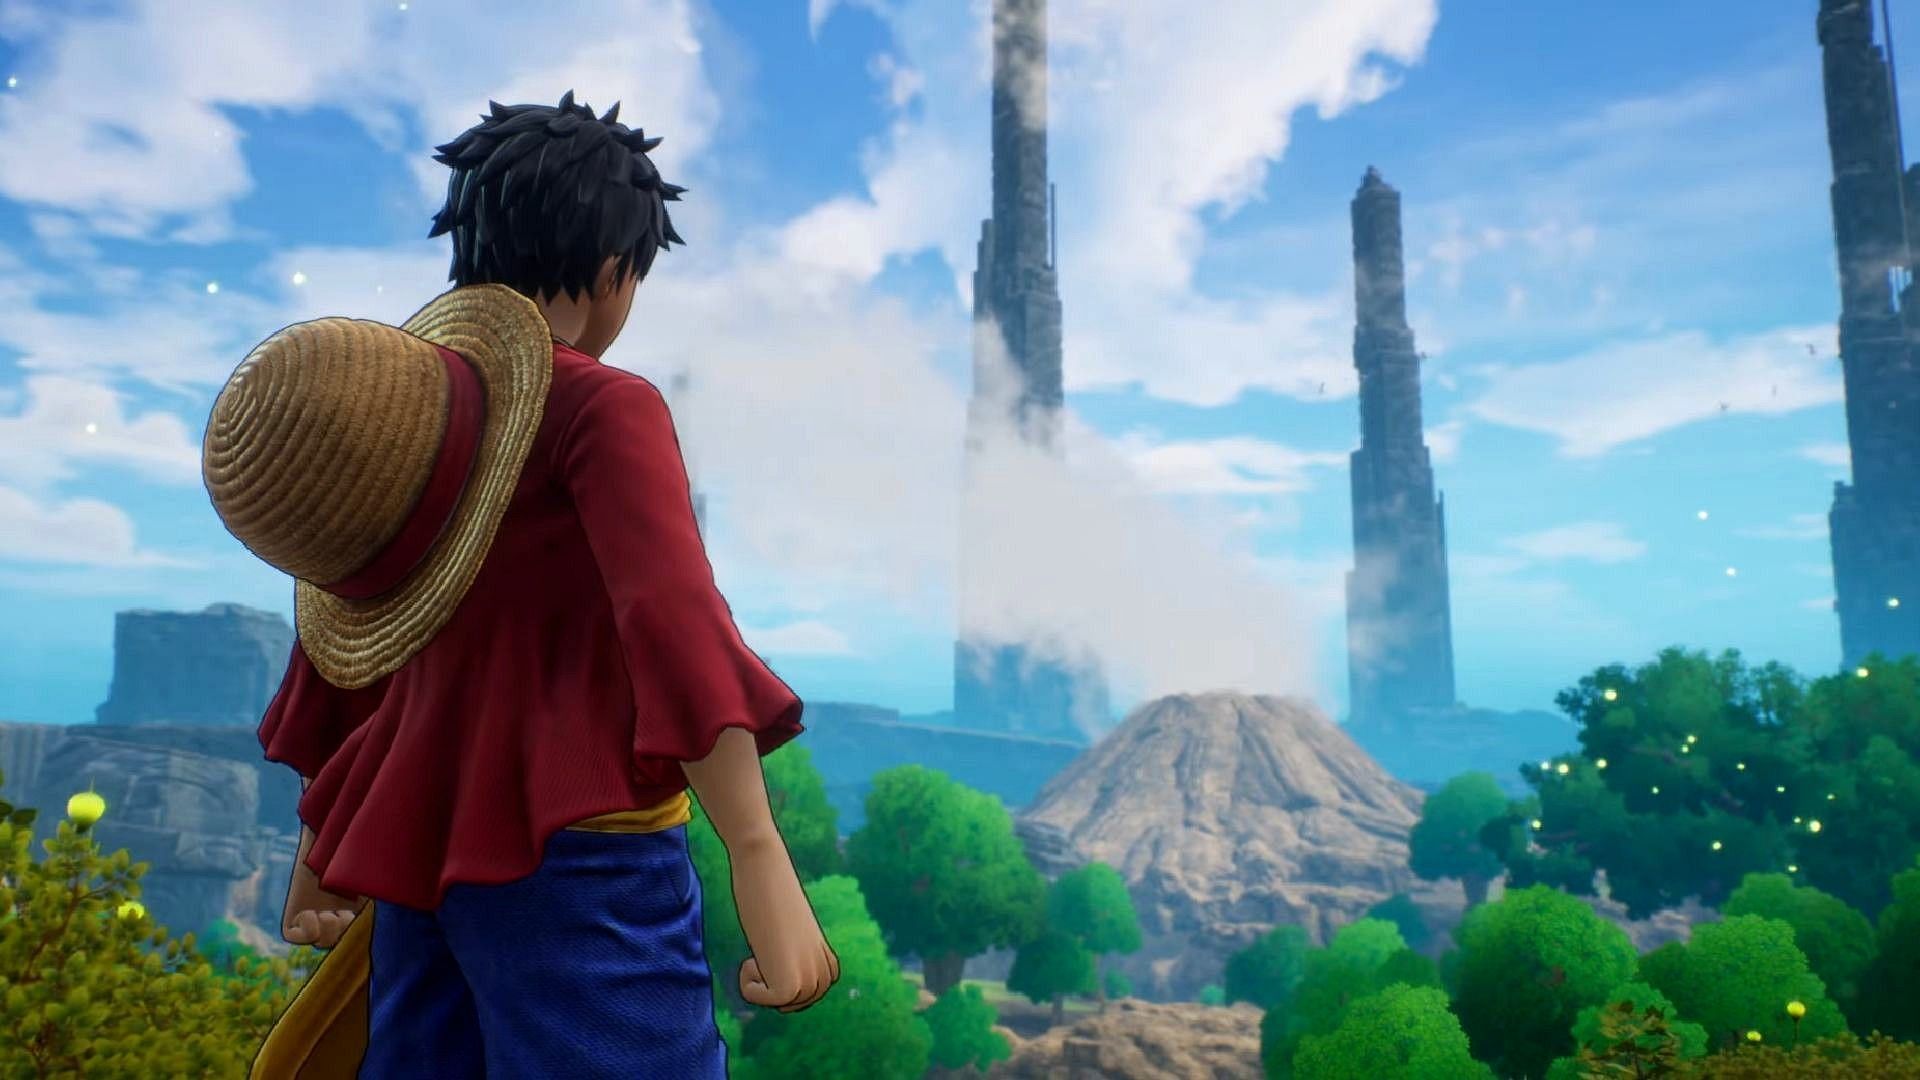 ONE PIECE World Seeker Adds New Playable Characters in Upcoming DLC